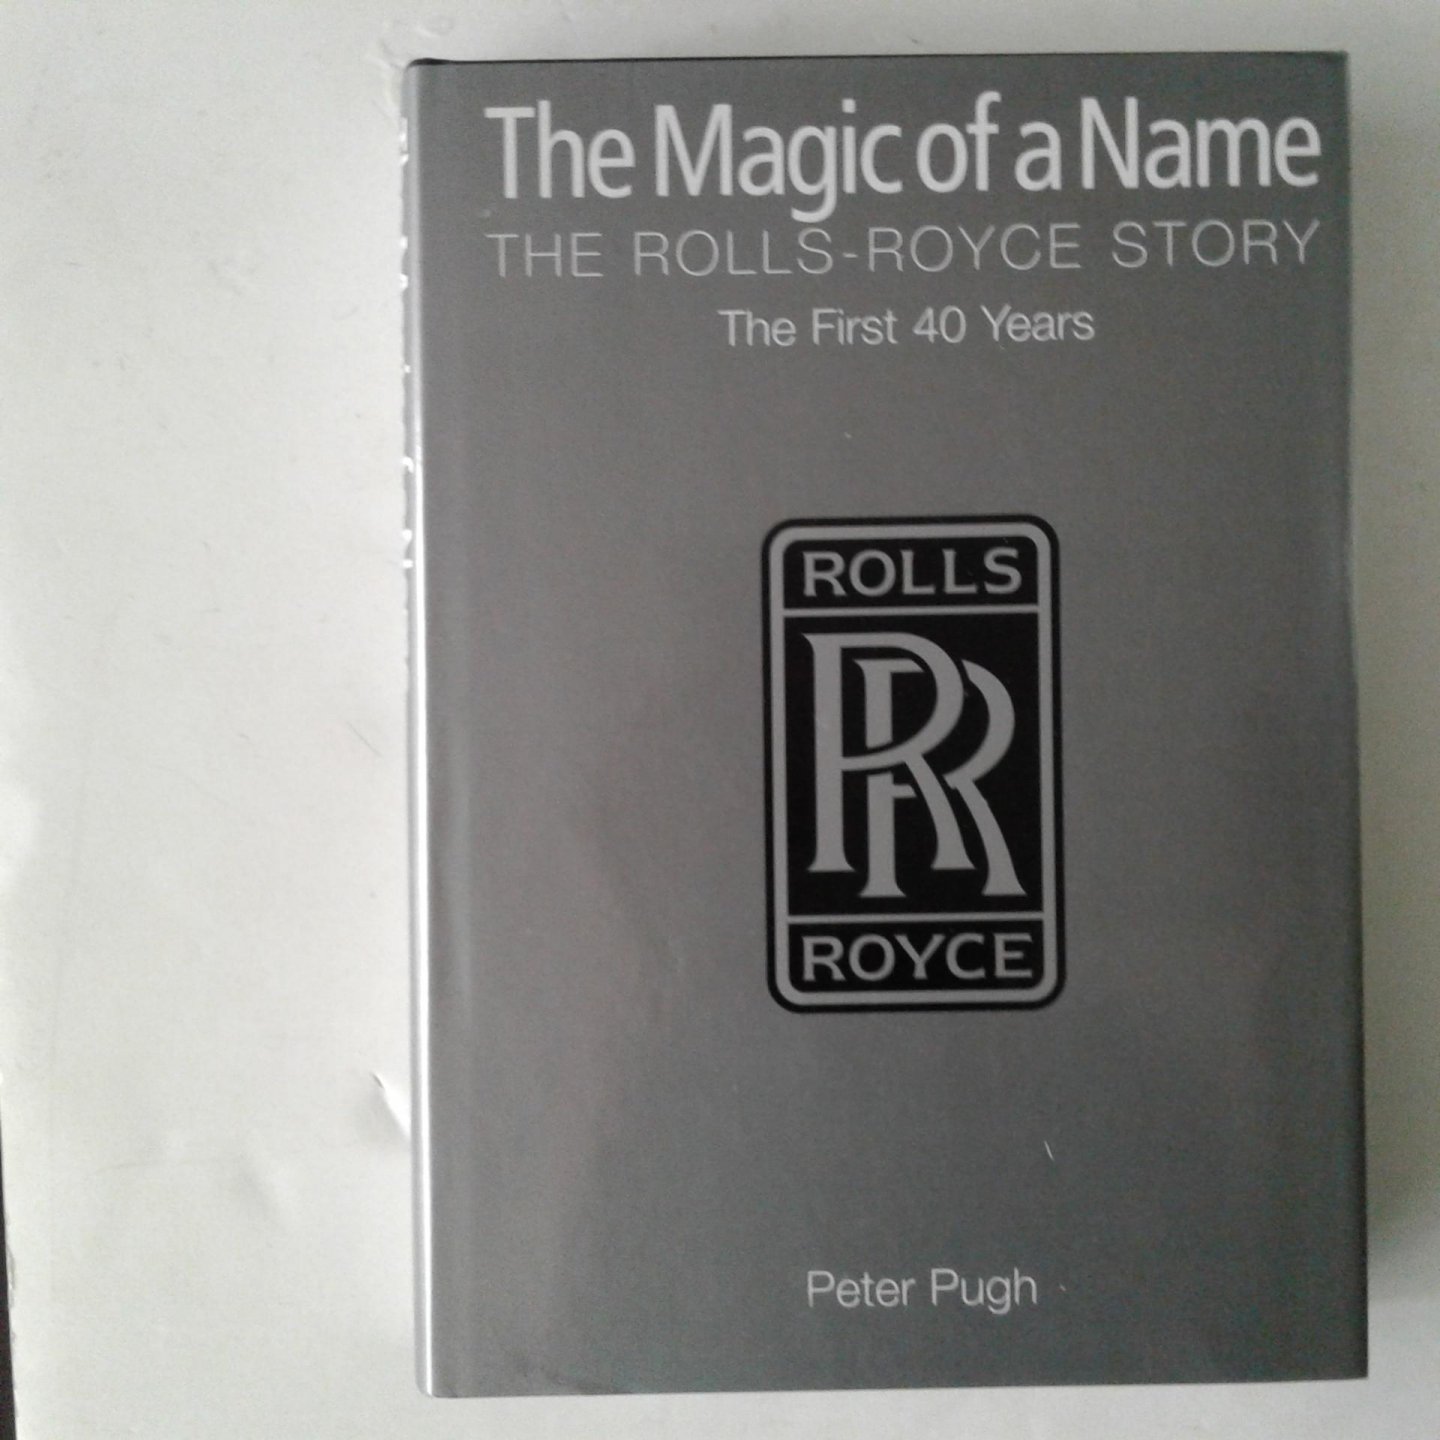 Pugh, Peter - The Magic of a Name ; The Rolls-Royce Story, the First 40 Years